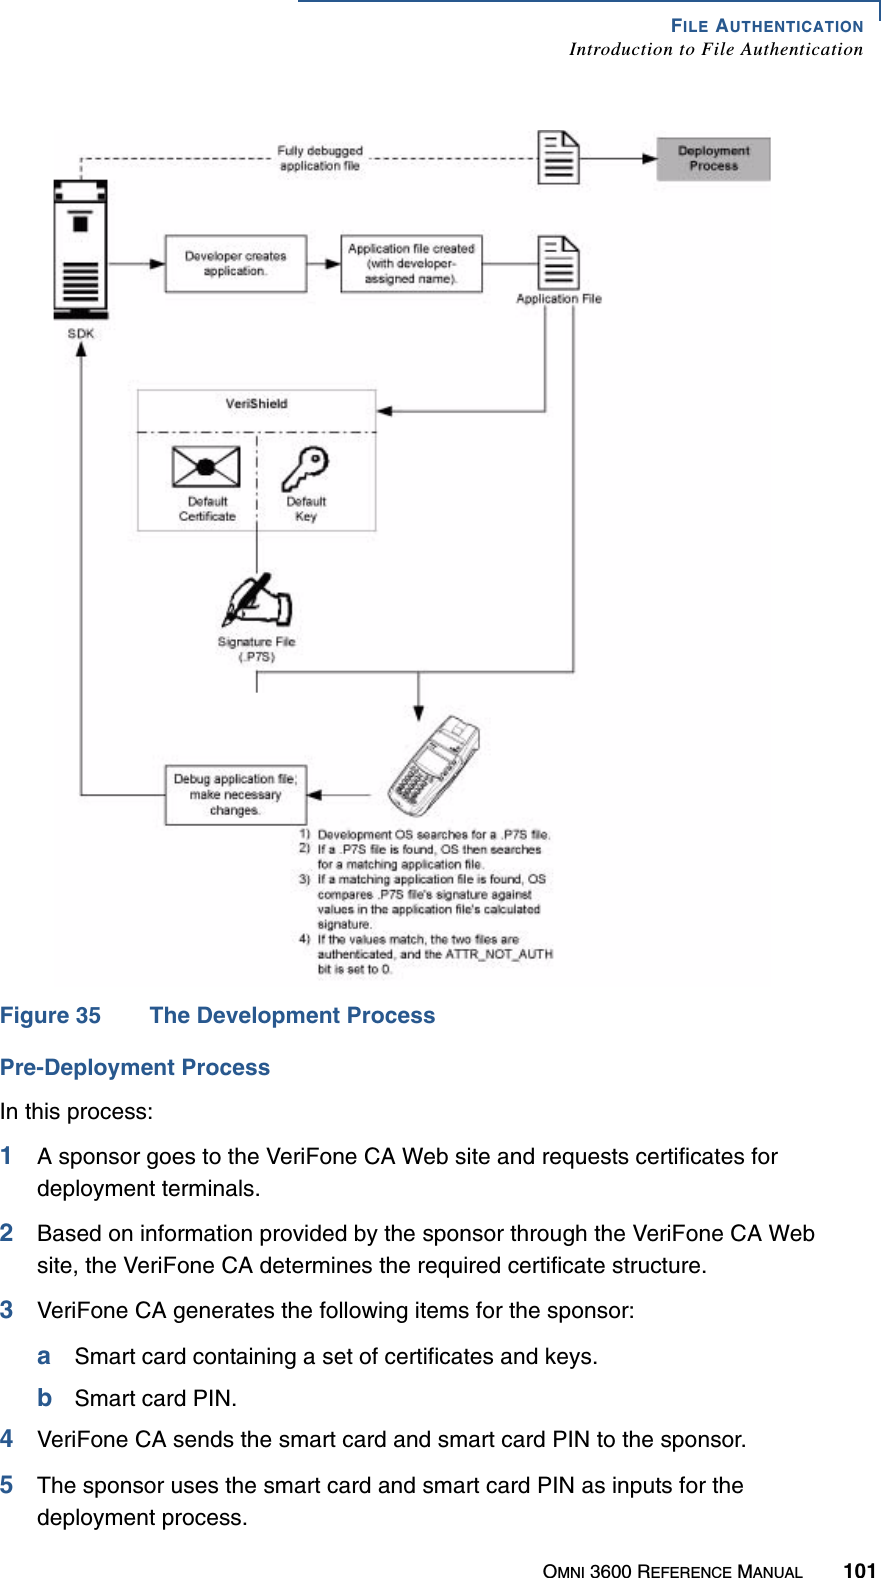 FILE AUTHENTICATIONIntroduction to File AuthenticationOMNI 3600 REFERENCE MANUAL 101Figure 35 The Development ProcessPre-Deployment ProcessIn this process:1A sponsor goes to the VeriFone CA Web site and requests certificates for deployment terminals.2Based on information provided by the sponsor through the VeriFone CA Web site, the VeriFone CA determines the required certificate structure.3VeriFone CA generates the following items for the sponsor:aSmart card containing a set of certificates and keys.bSmart card PIN.4VeriFone CA sends the smart card and smart card PIN to the sponsor.5The sponsor uses the smart card and smart card PIN as inputs for the deployment process.